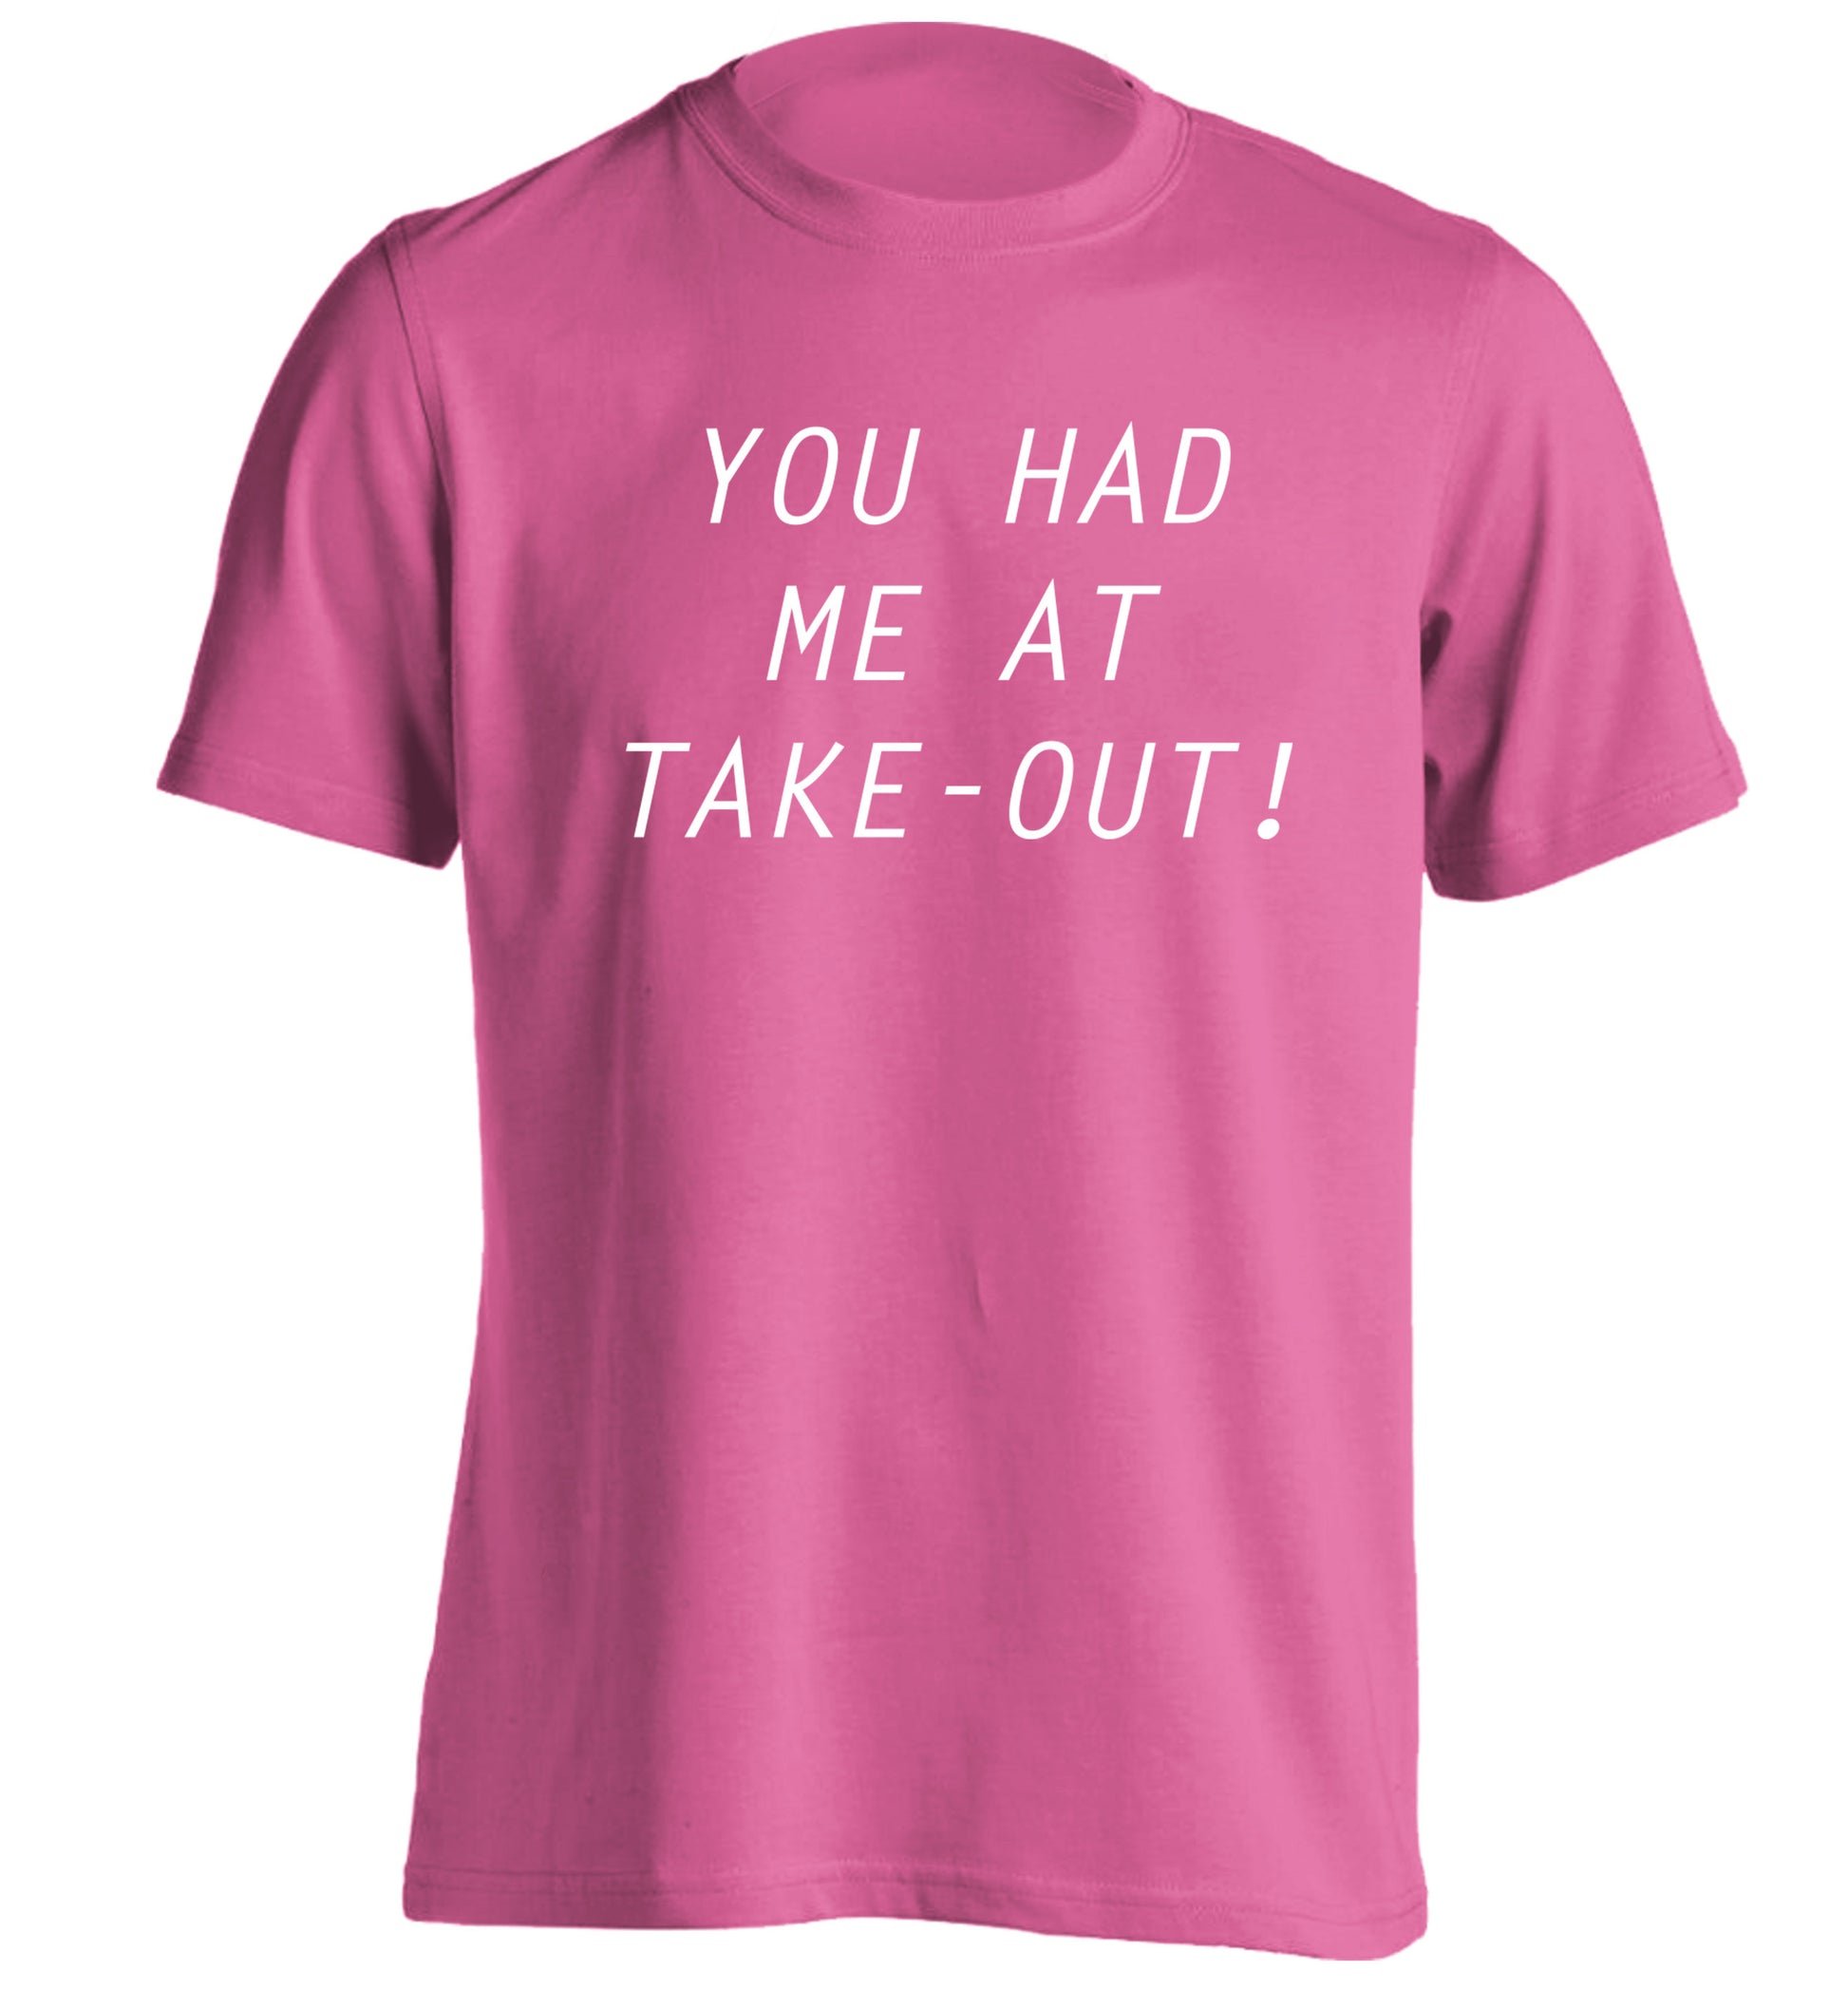 You had me at take-out adults unisex pink Tshirt 2XL